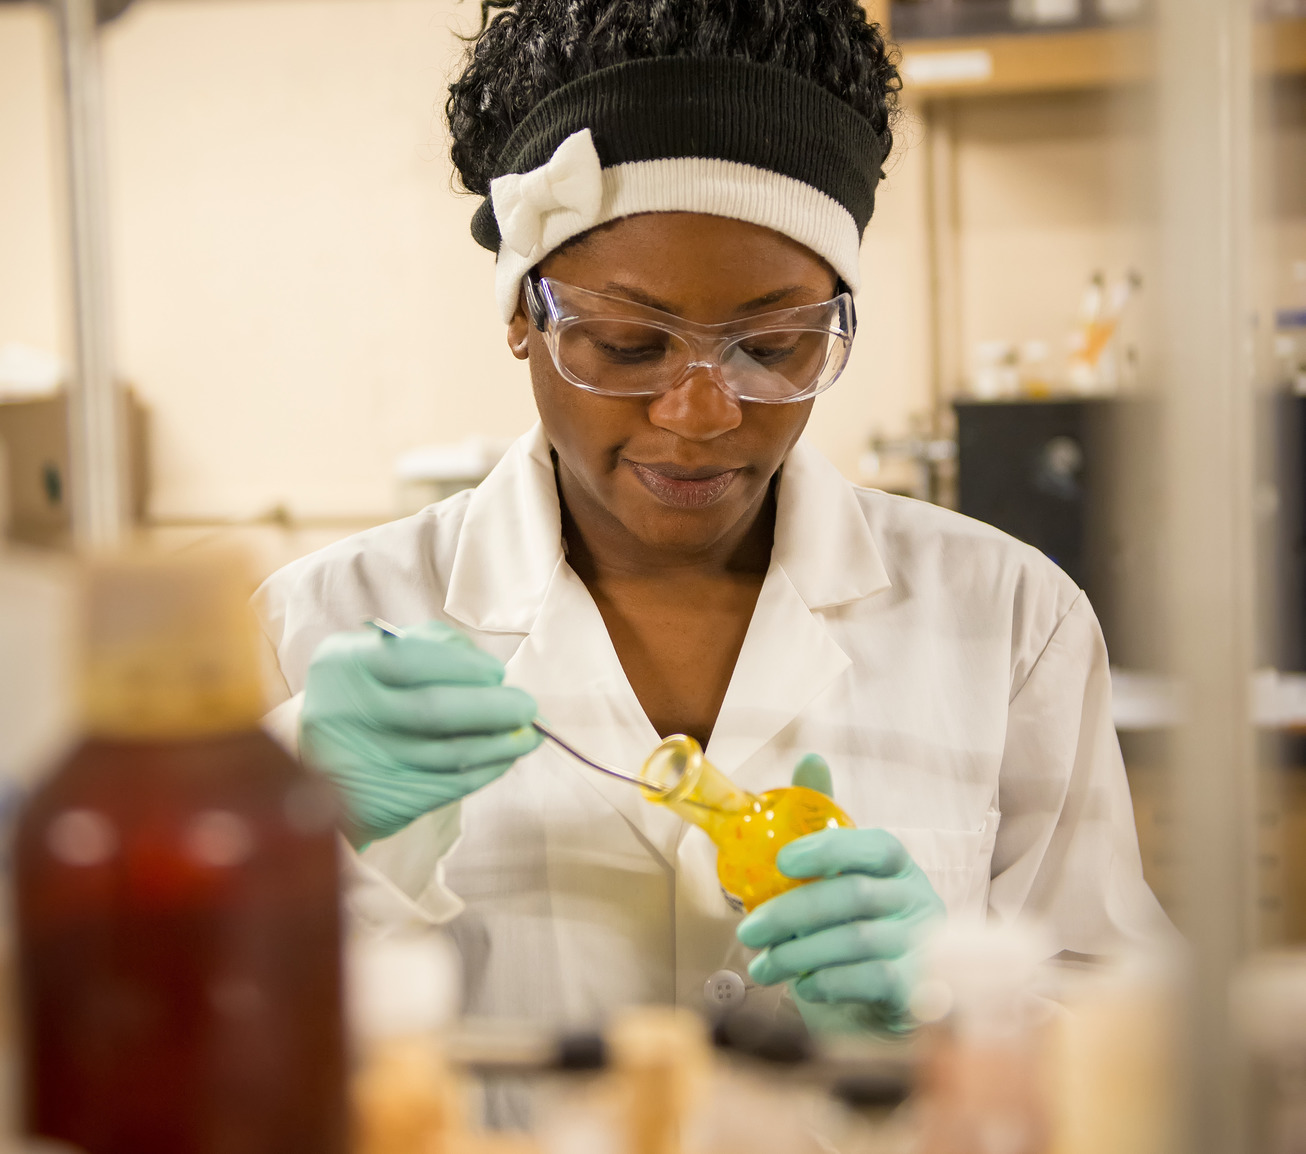 a young Black woman wearing a lab coat, gloves, and safety goggles, is using the equipment in a chemistry lab